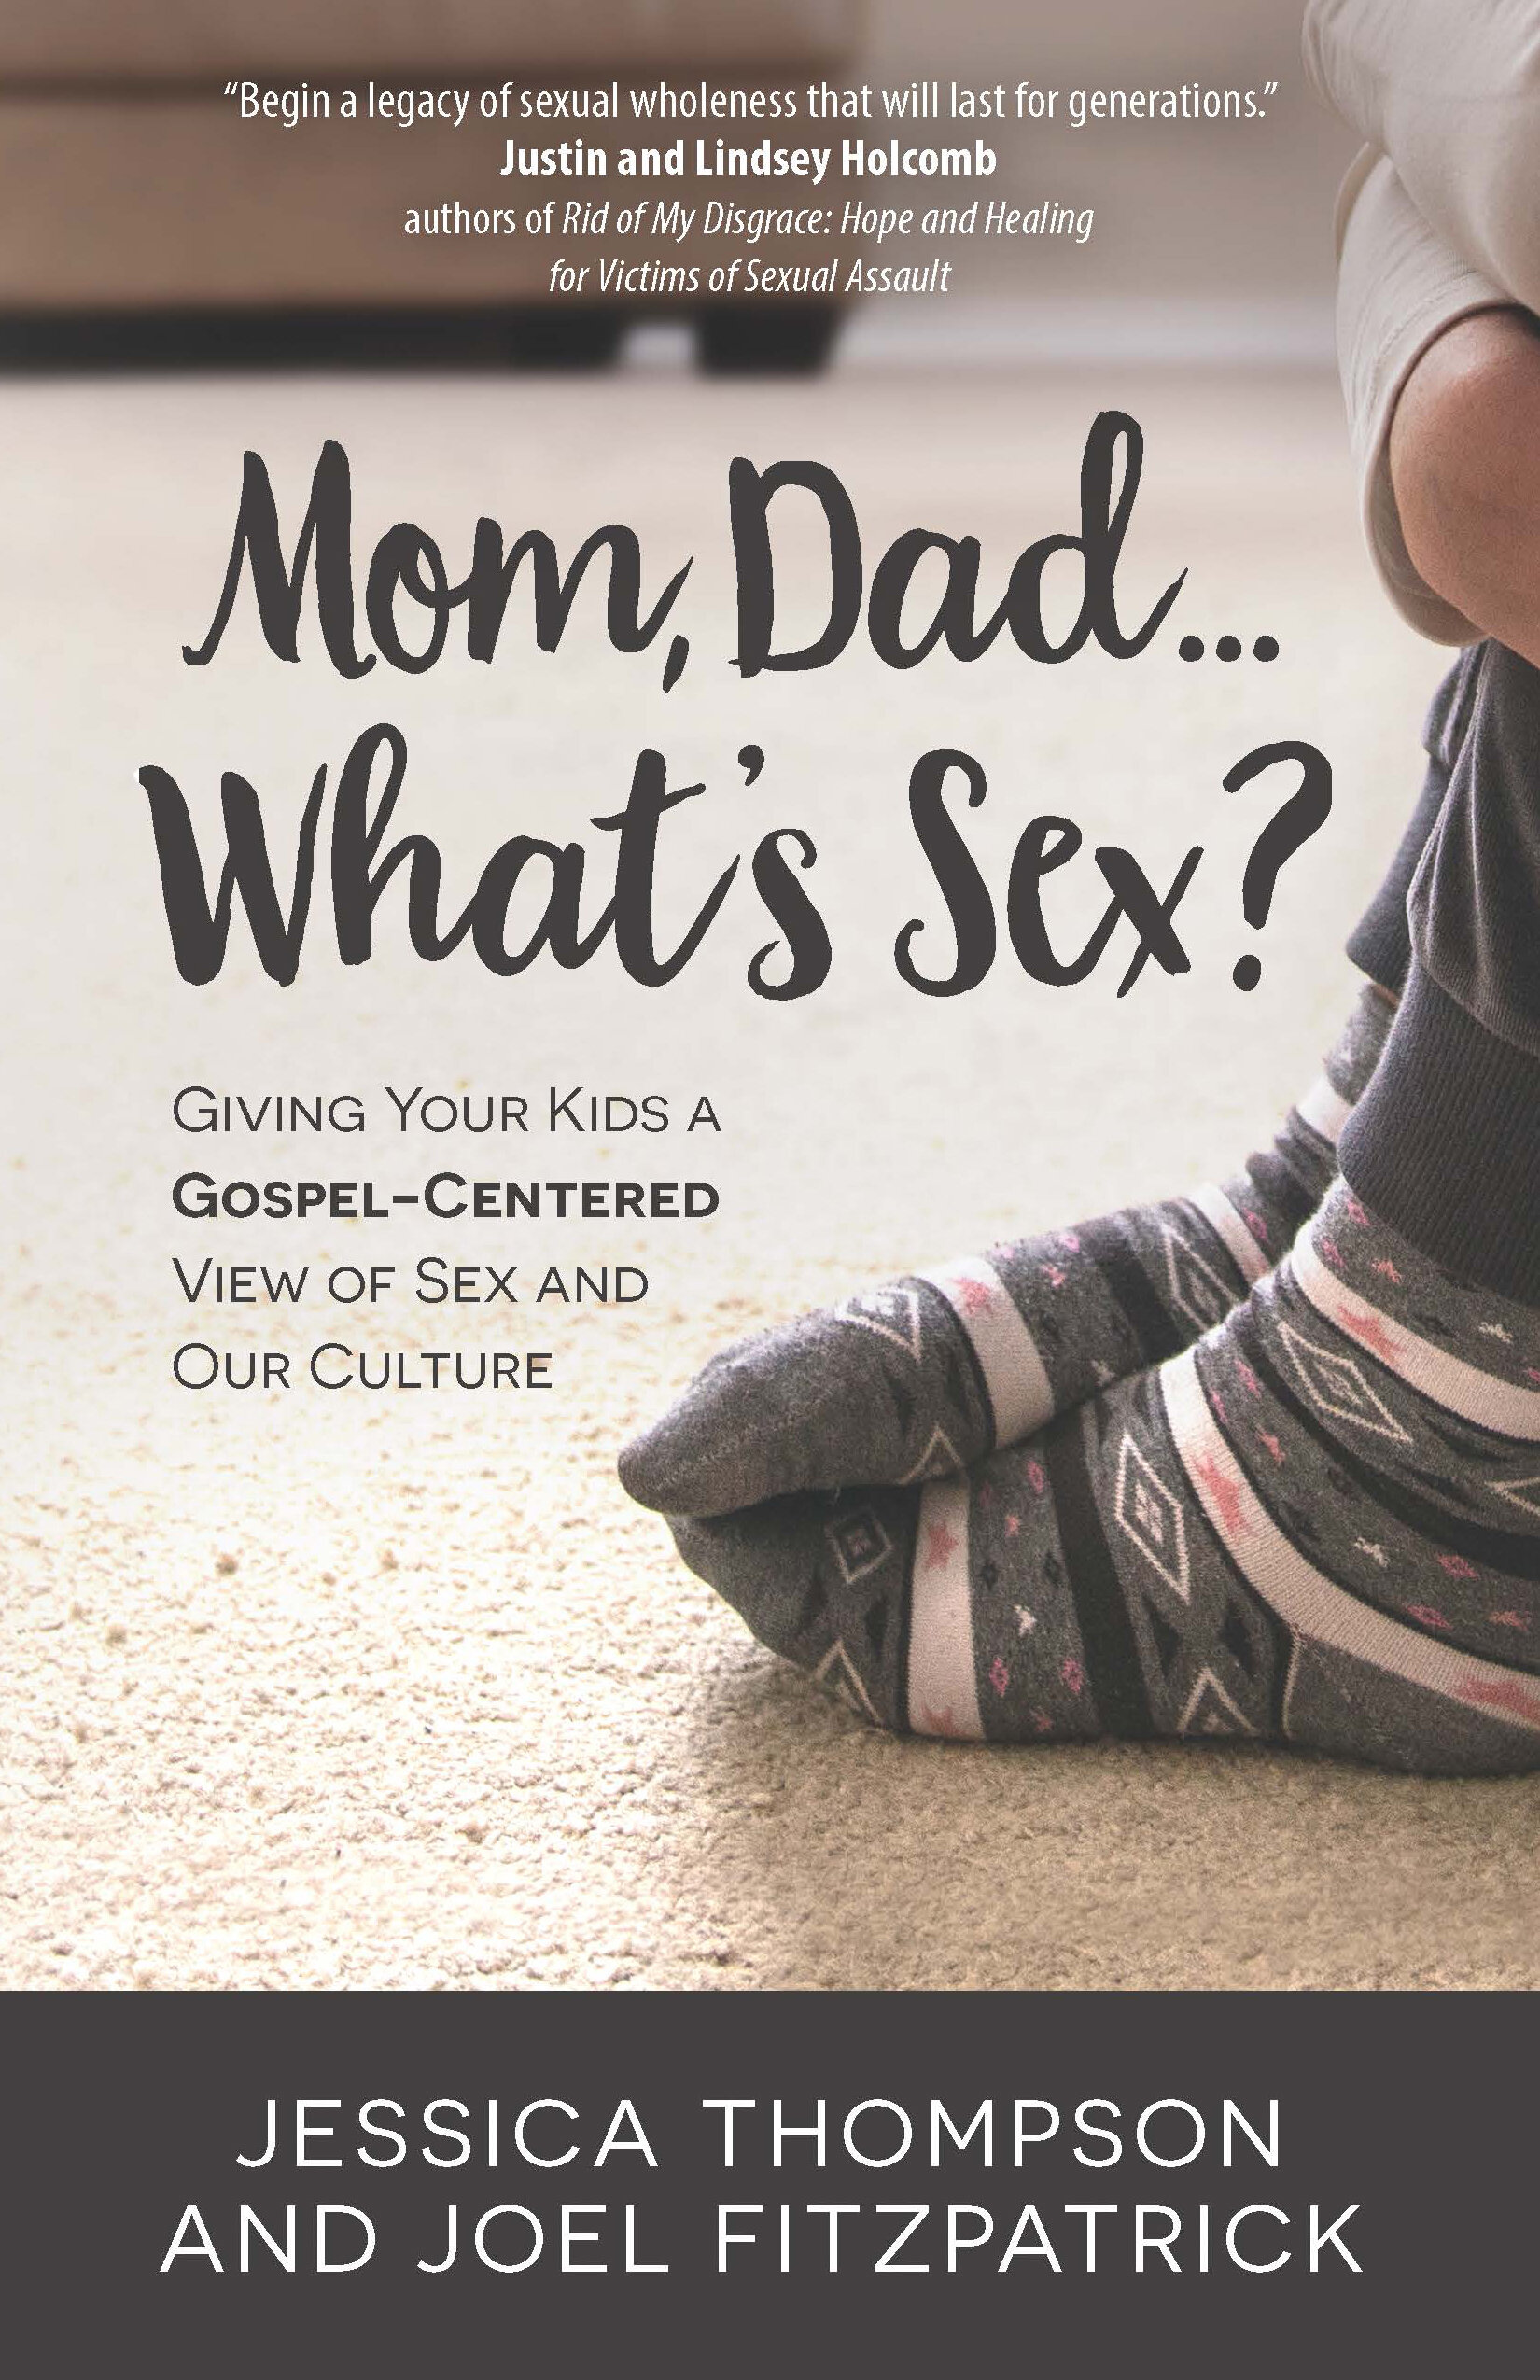 Mom, Dad...Whats Sex? Giving Your Kids a Gospel-Centered View of Sex and Our Culture Faithlife Ebooks